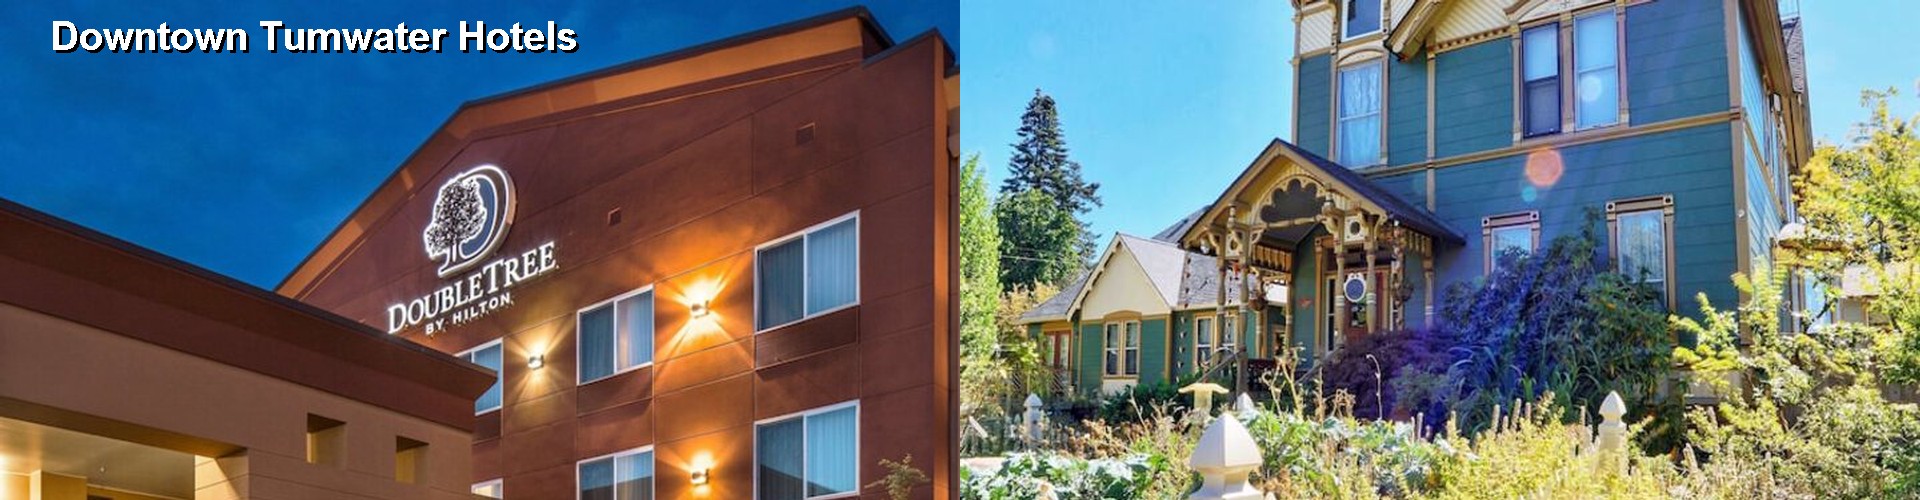 5 Best Hotels near Downtown Tumwater